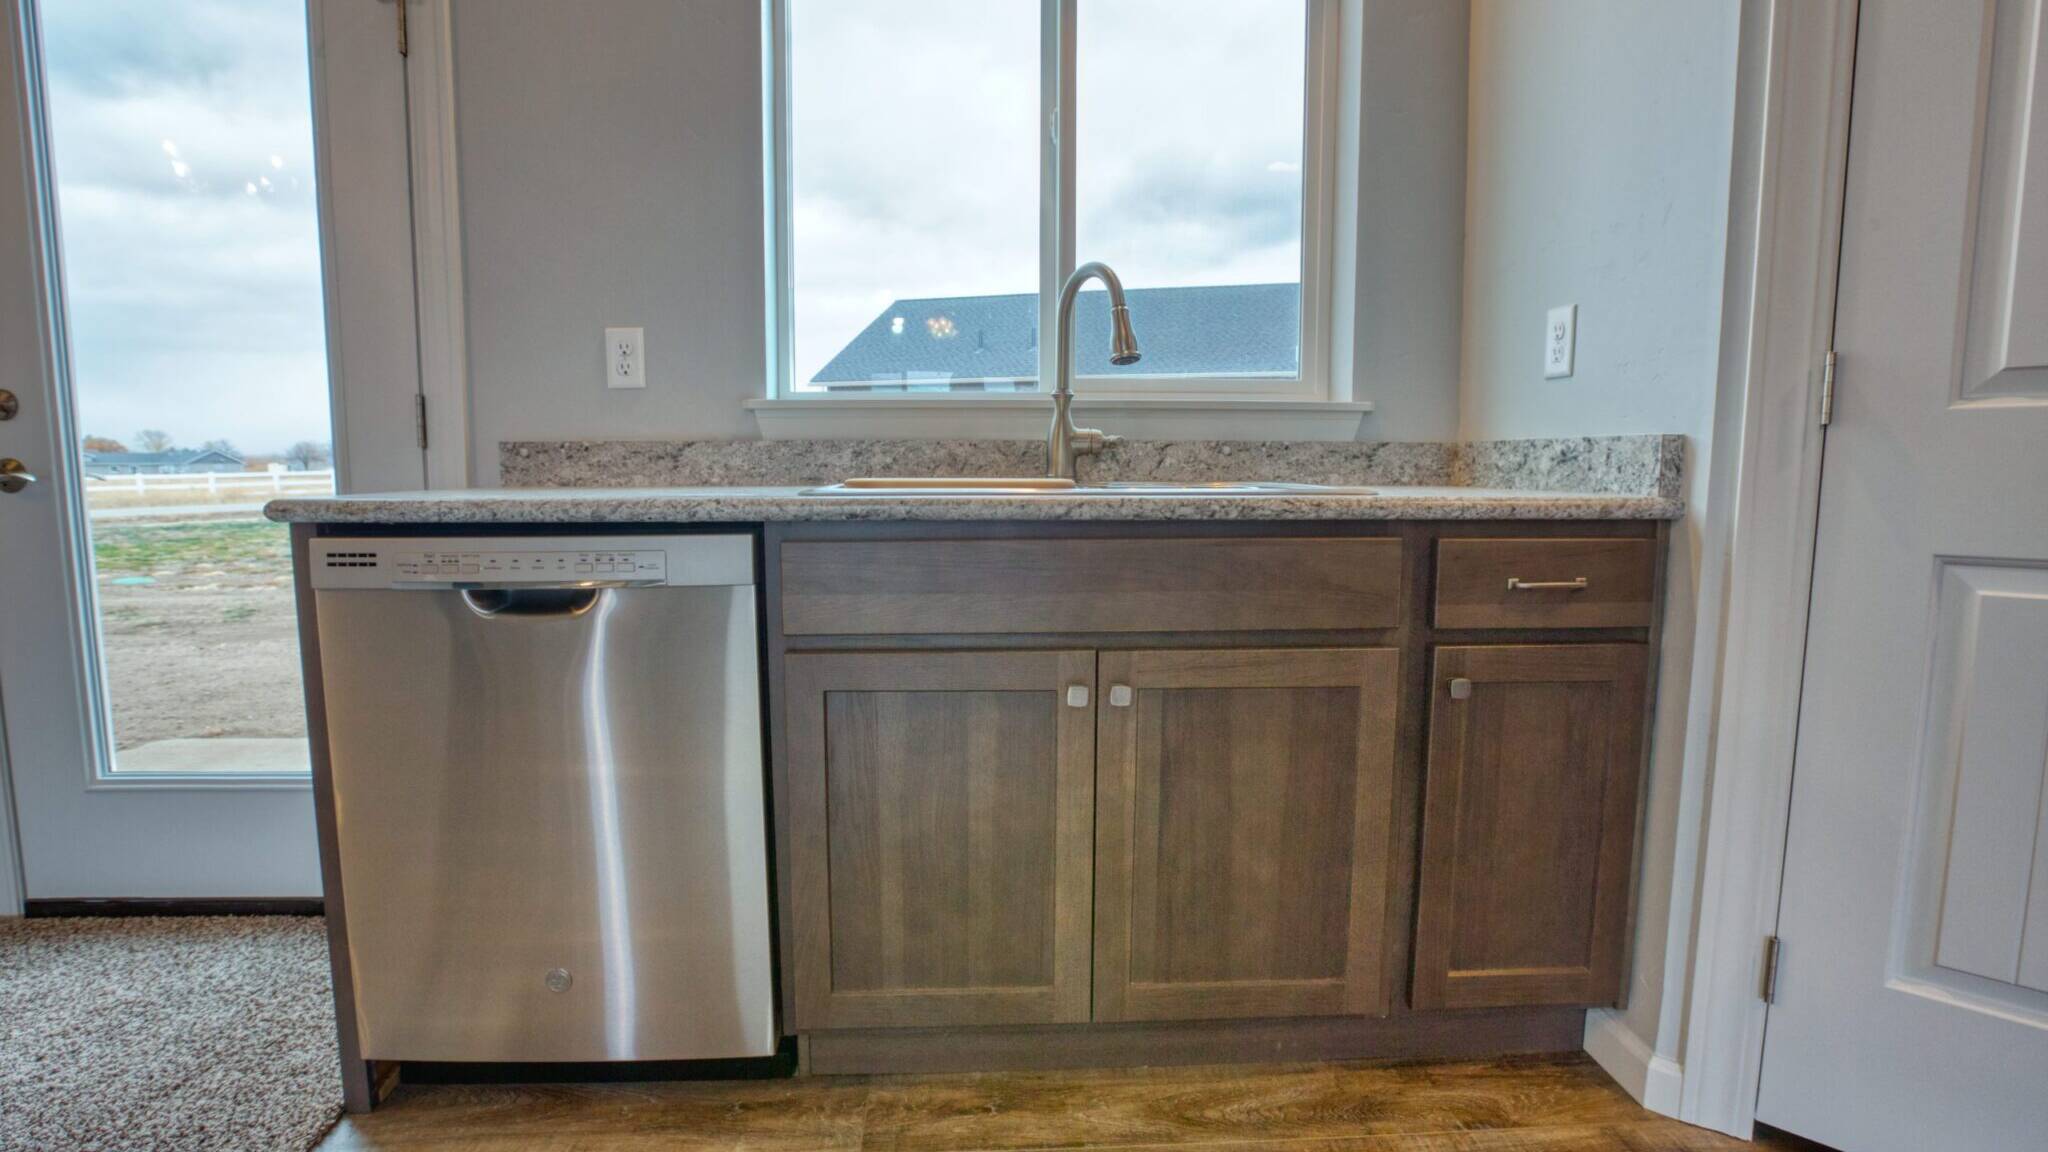 Kitchen in the Canyon Ferry model home - built by Big Sky Builders in Hamilton, MT